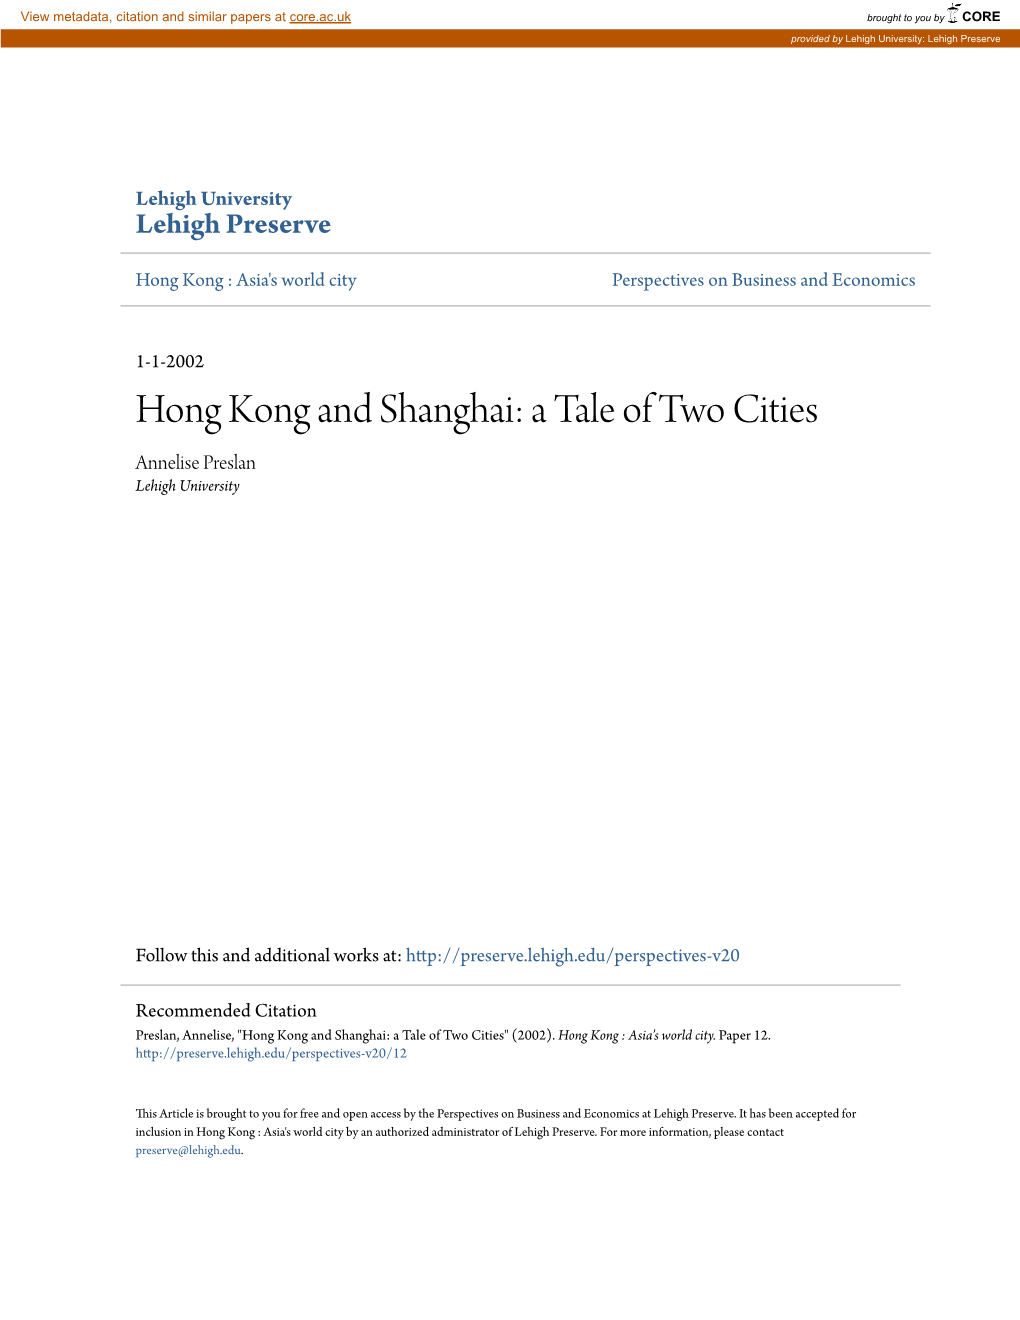 Hong Kong and Shanghai: a Tale of Two Cities Annelise Preslan Lehigh University